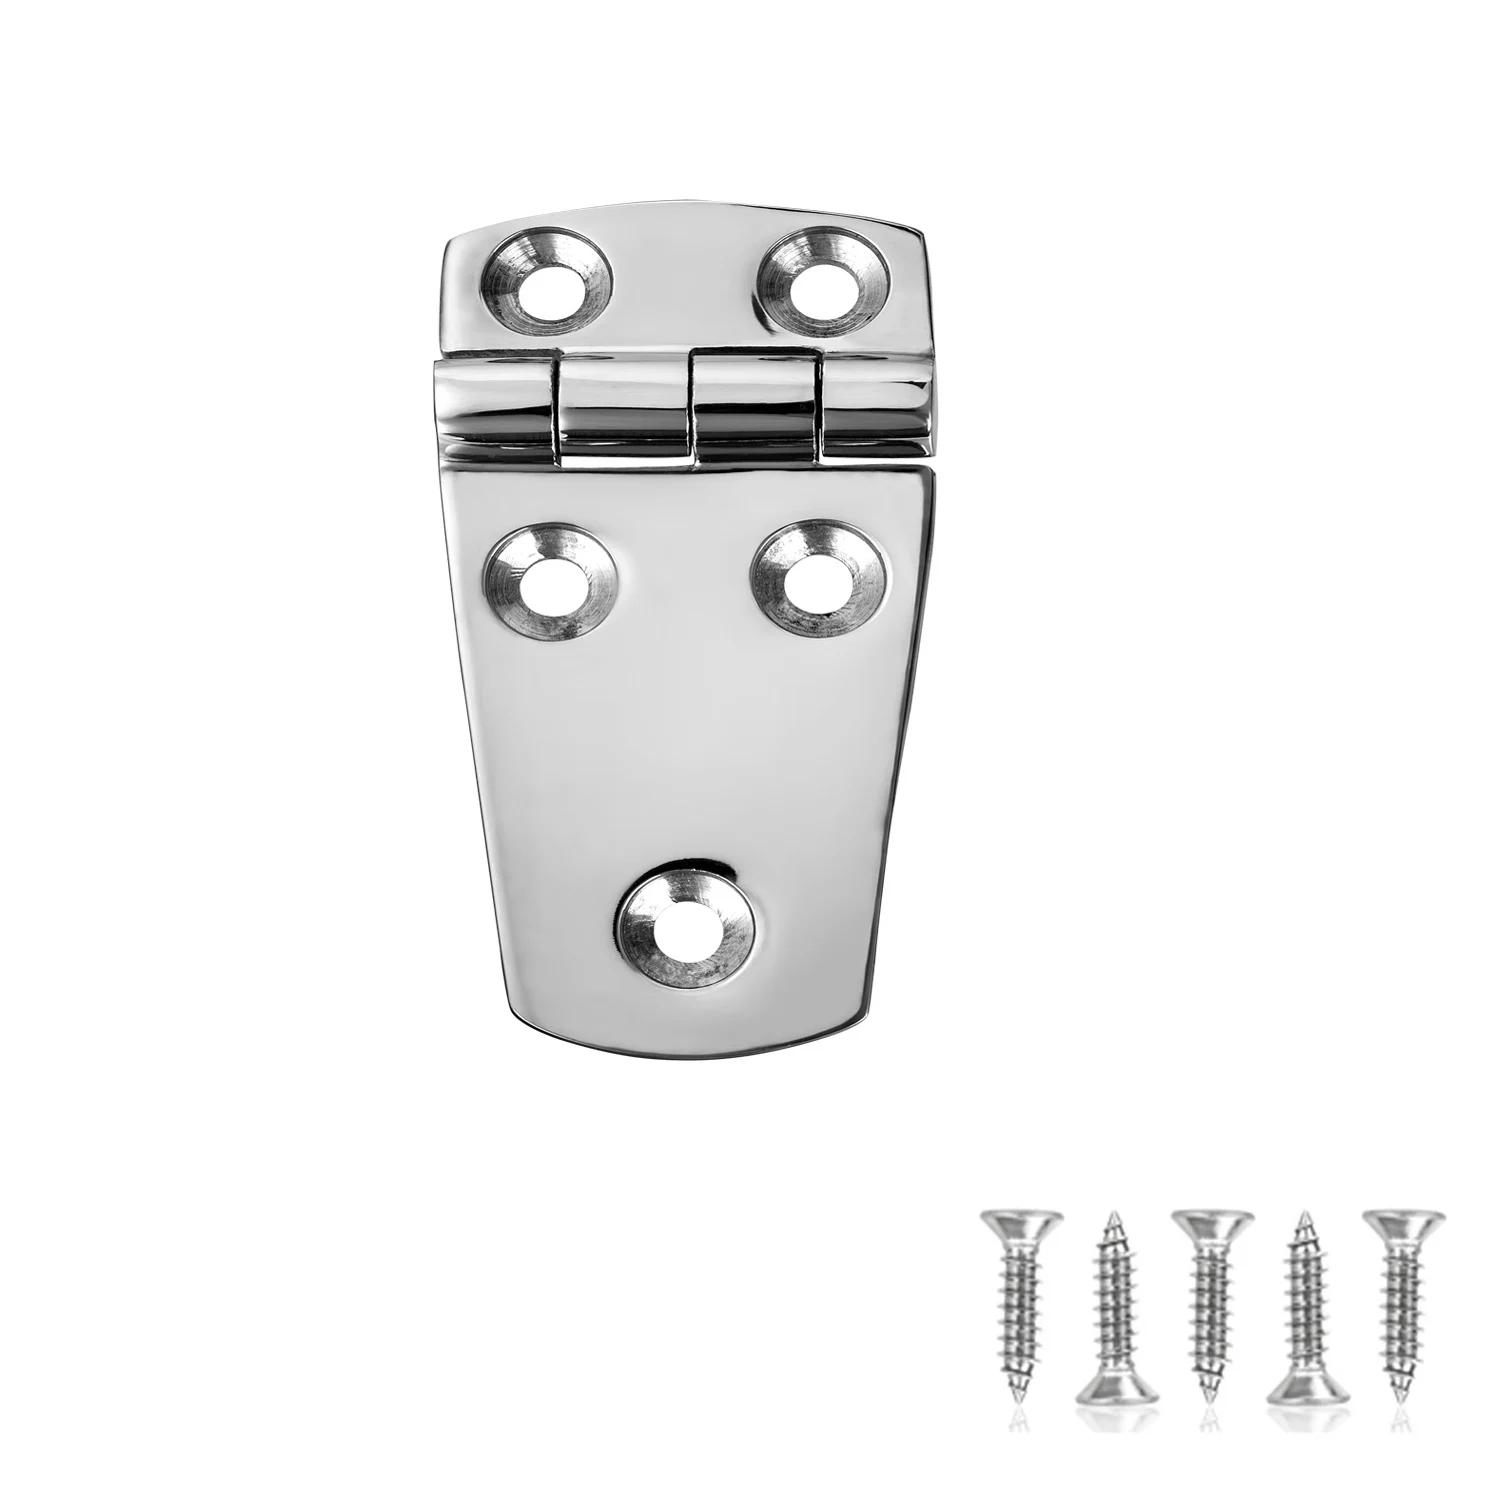 Marine Boat Hatch Hinges Stainless Steel, 3 Inch X 1.5 Inches(76 X 38MM) 5 Holes, No Noise, Heavy Duty 316 Ss with Screws